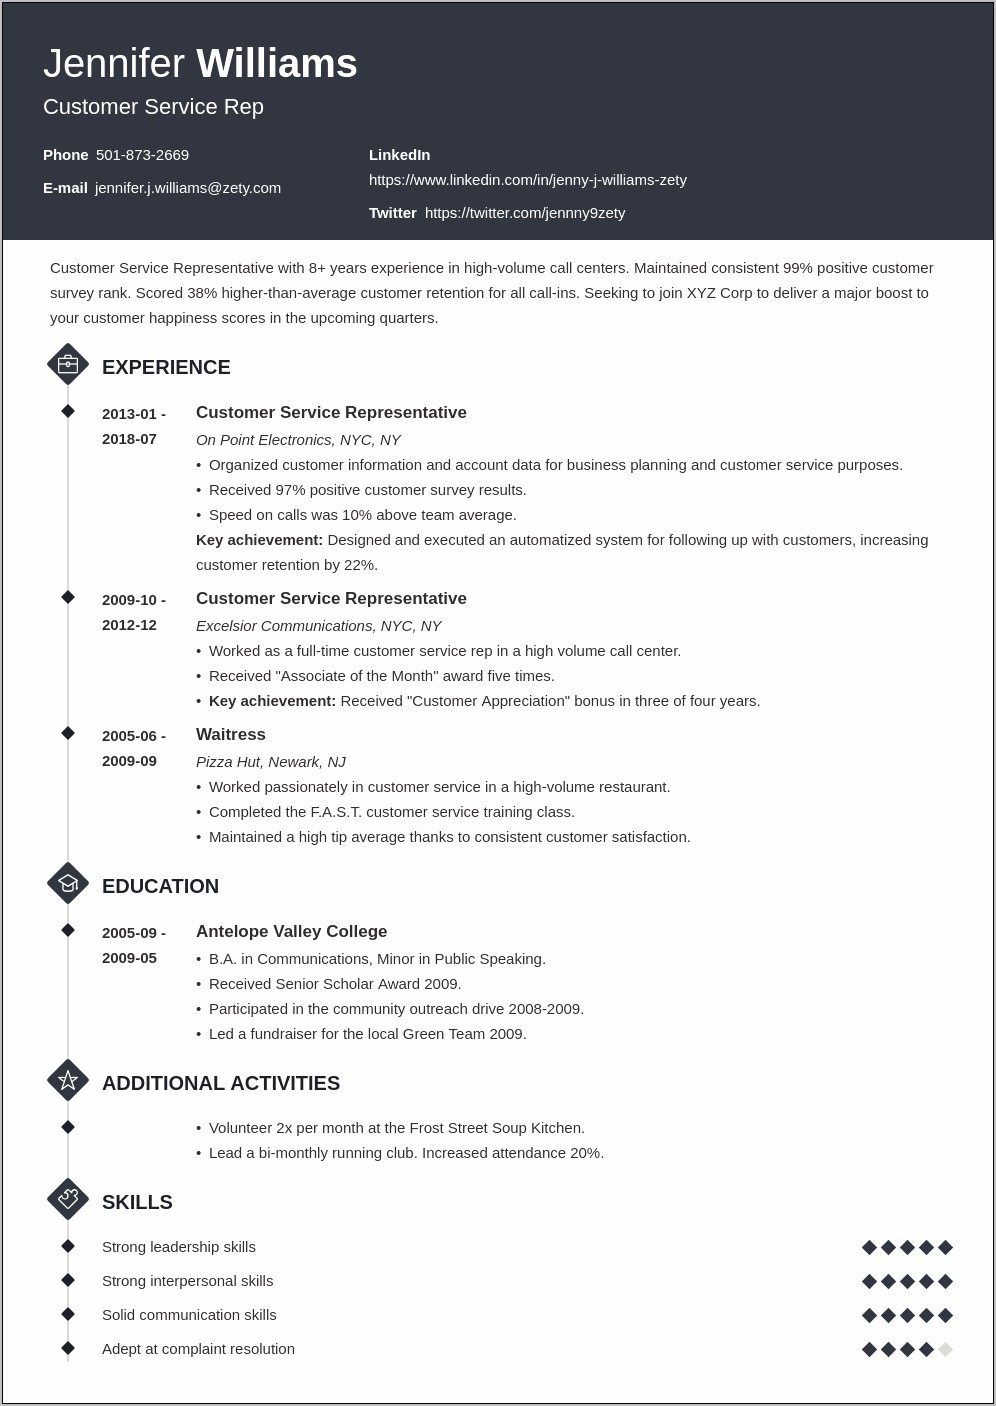 Resume Where To Put Everything In Order